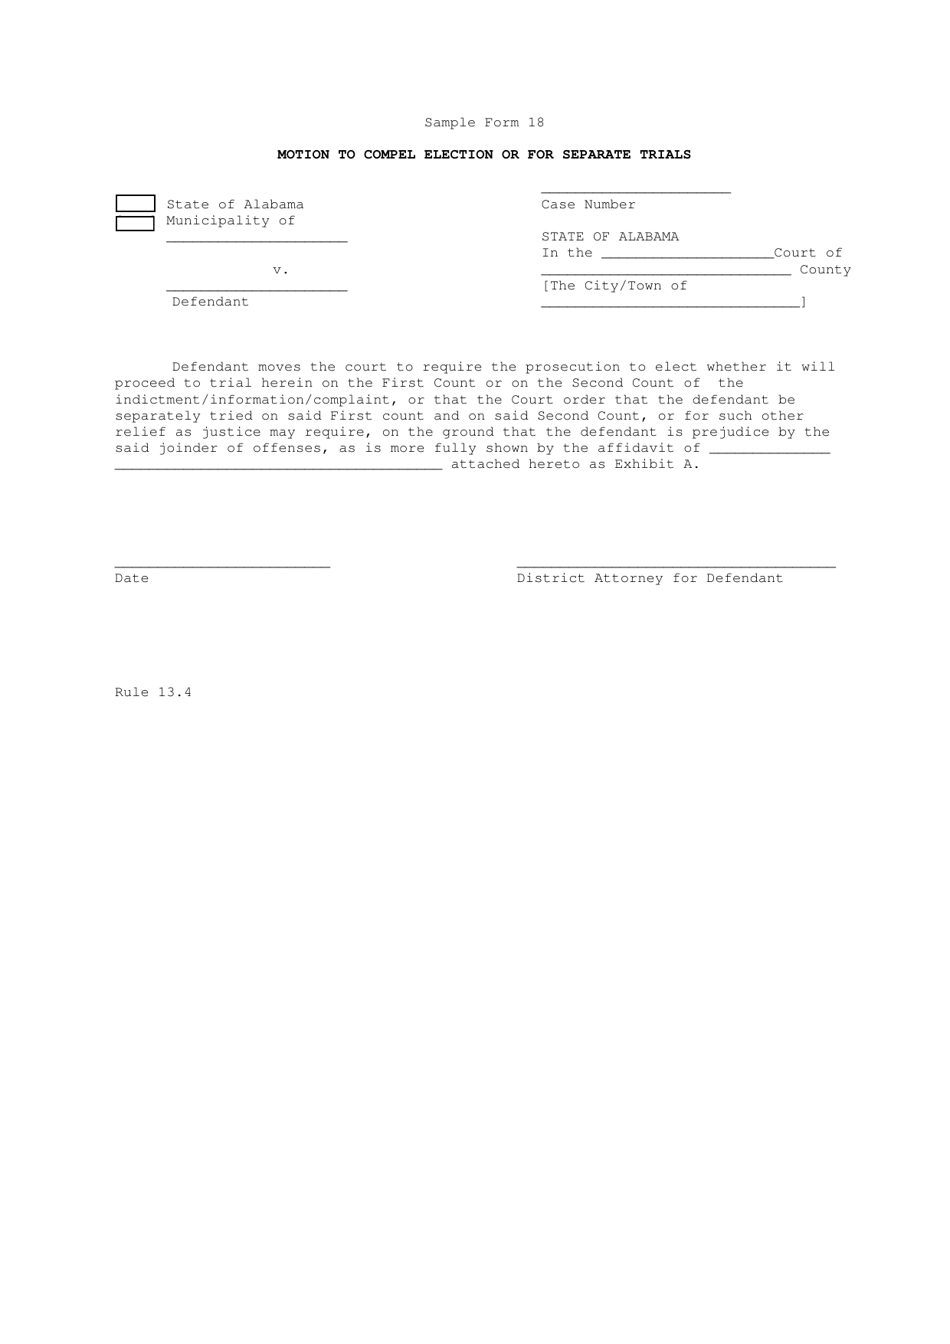 Sample Form 18 Motion to Compel Election or for Separate Trials - Alabama, Page 1